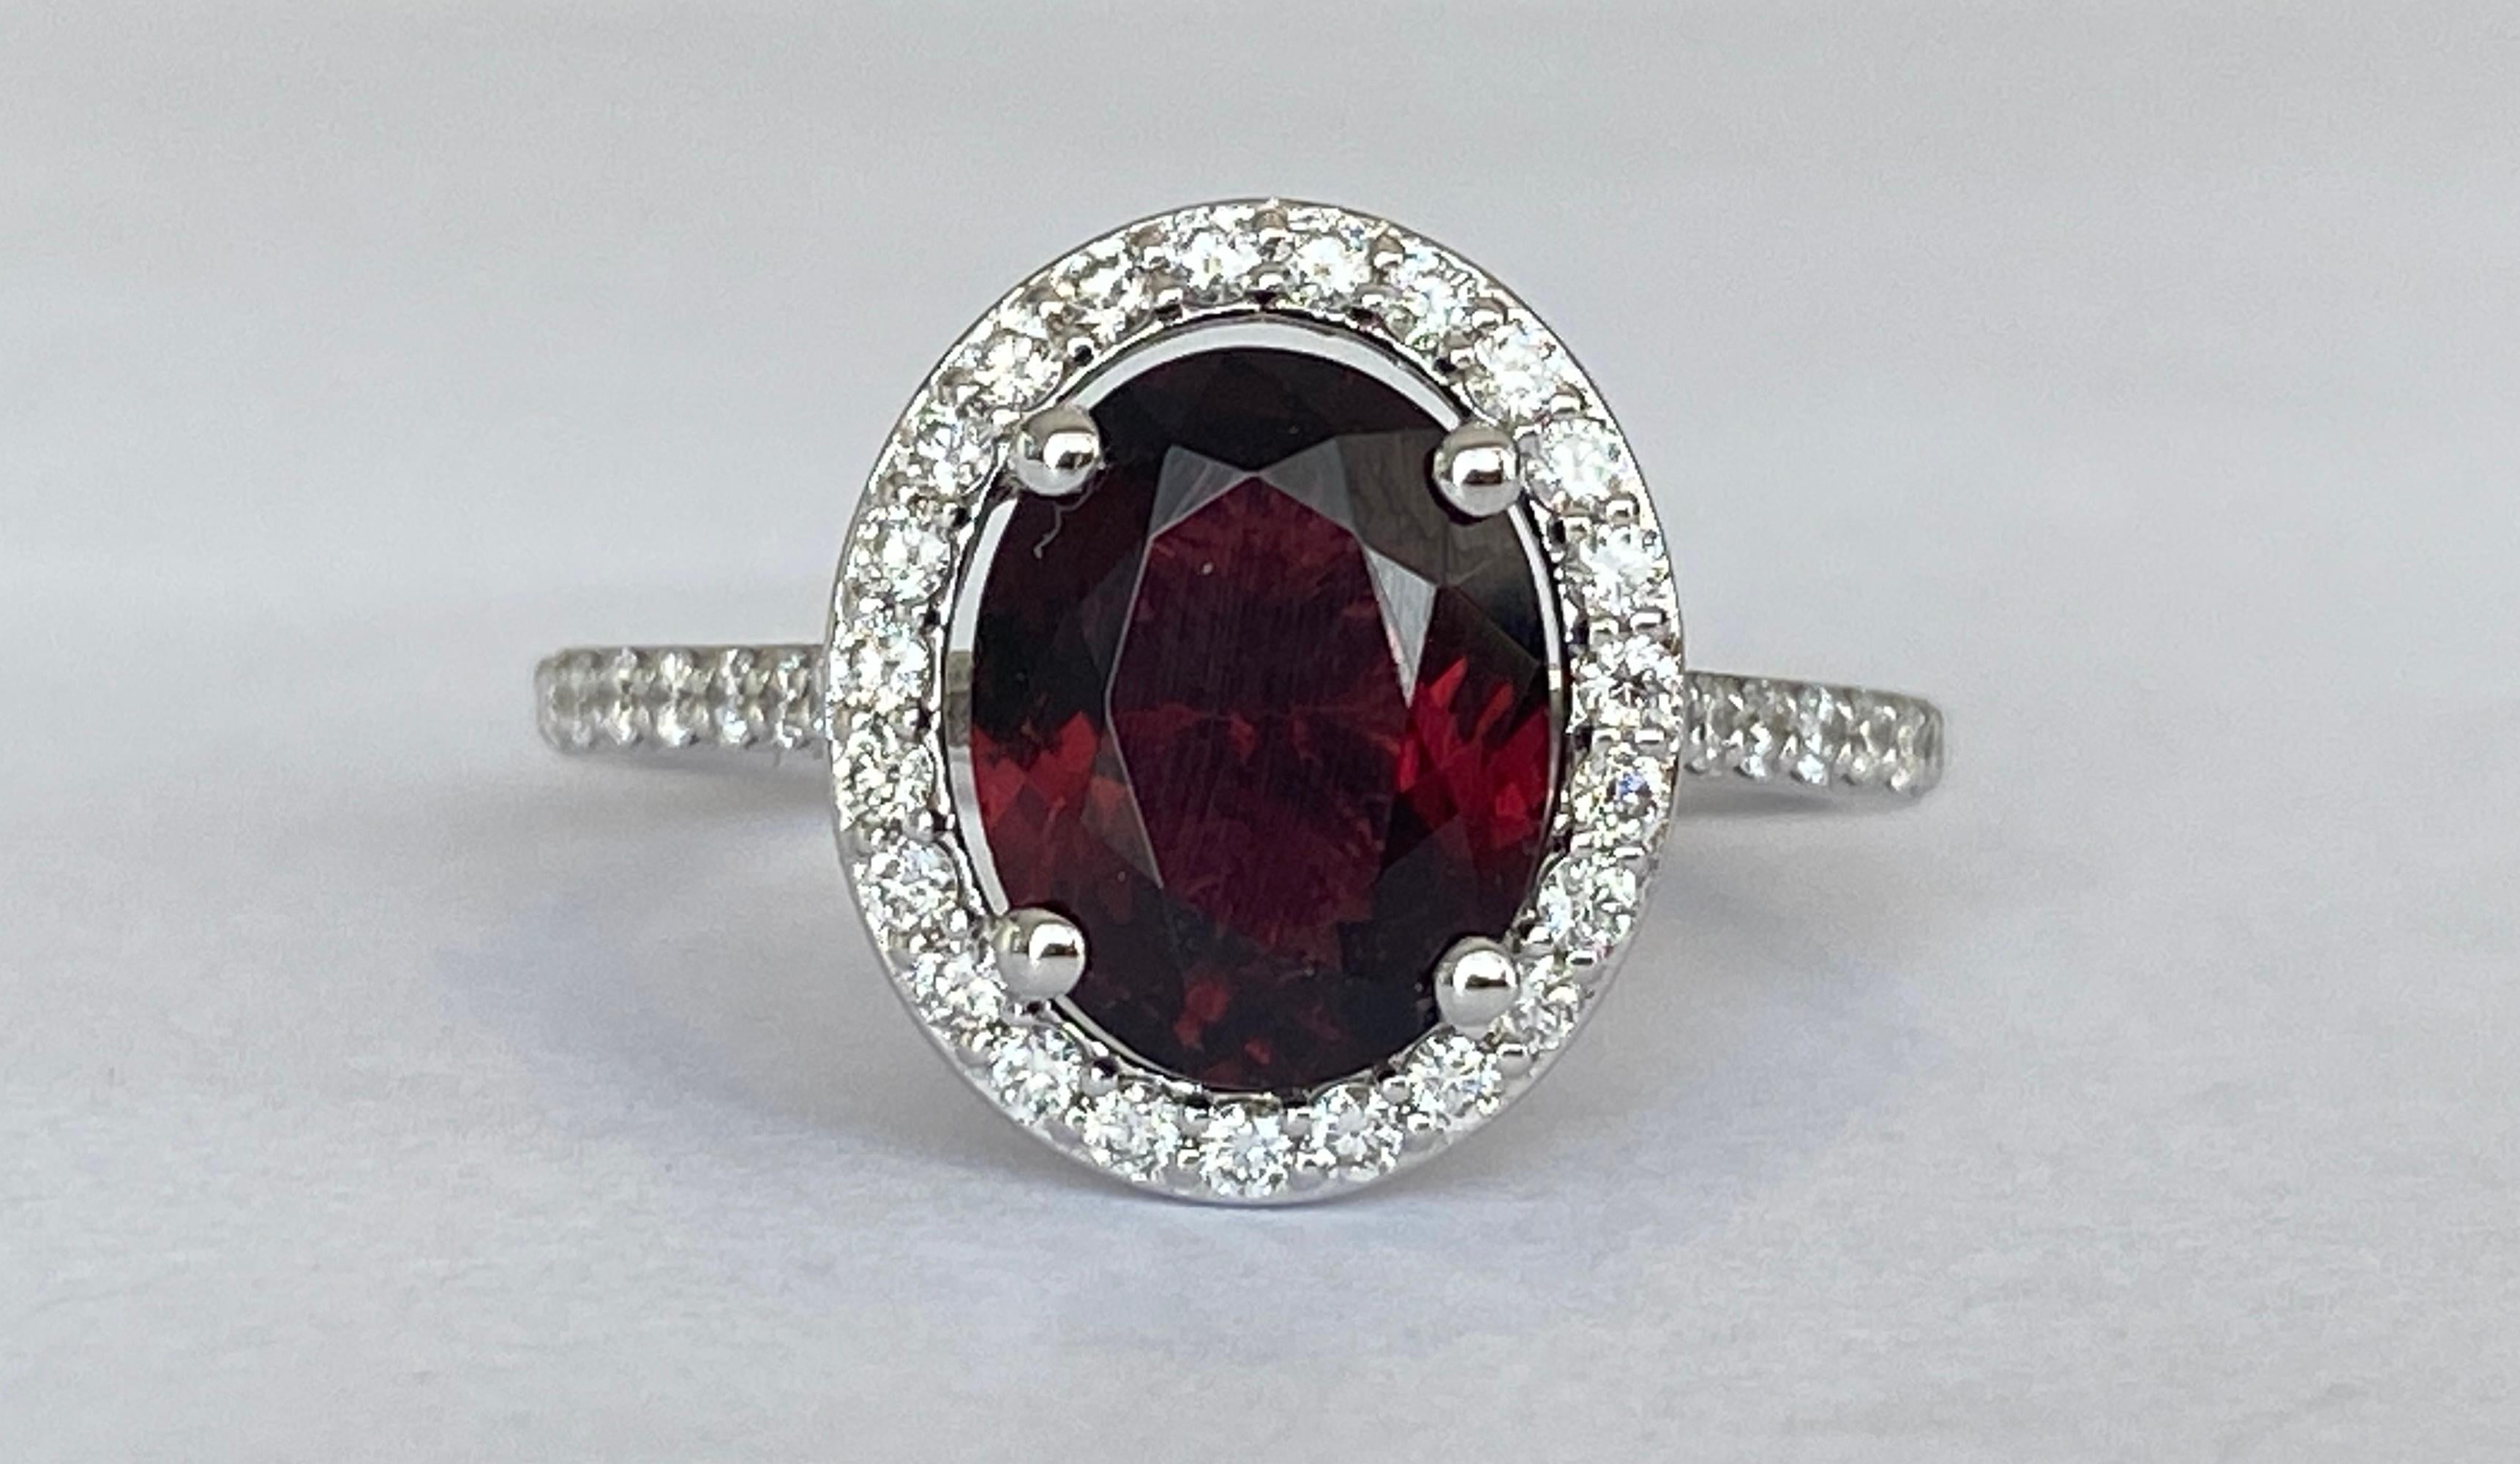 Offered beautiful Diana ring in white gold, with a beautiful oval cut Red tourmaline 1.90 ct. The ring is decorated with 37 pieces of brilliant cut  diamonds, 0.35 ct in total, of quality F/G/VS/SI. ALGT certificate is included. Report